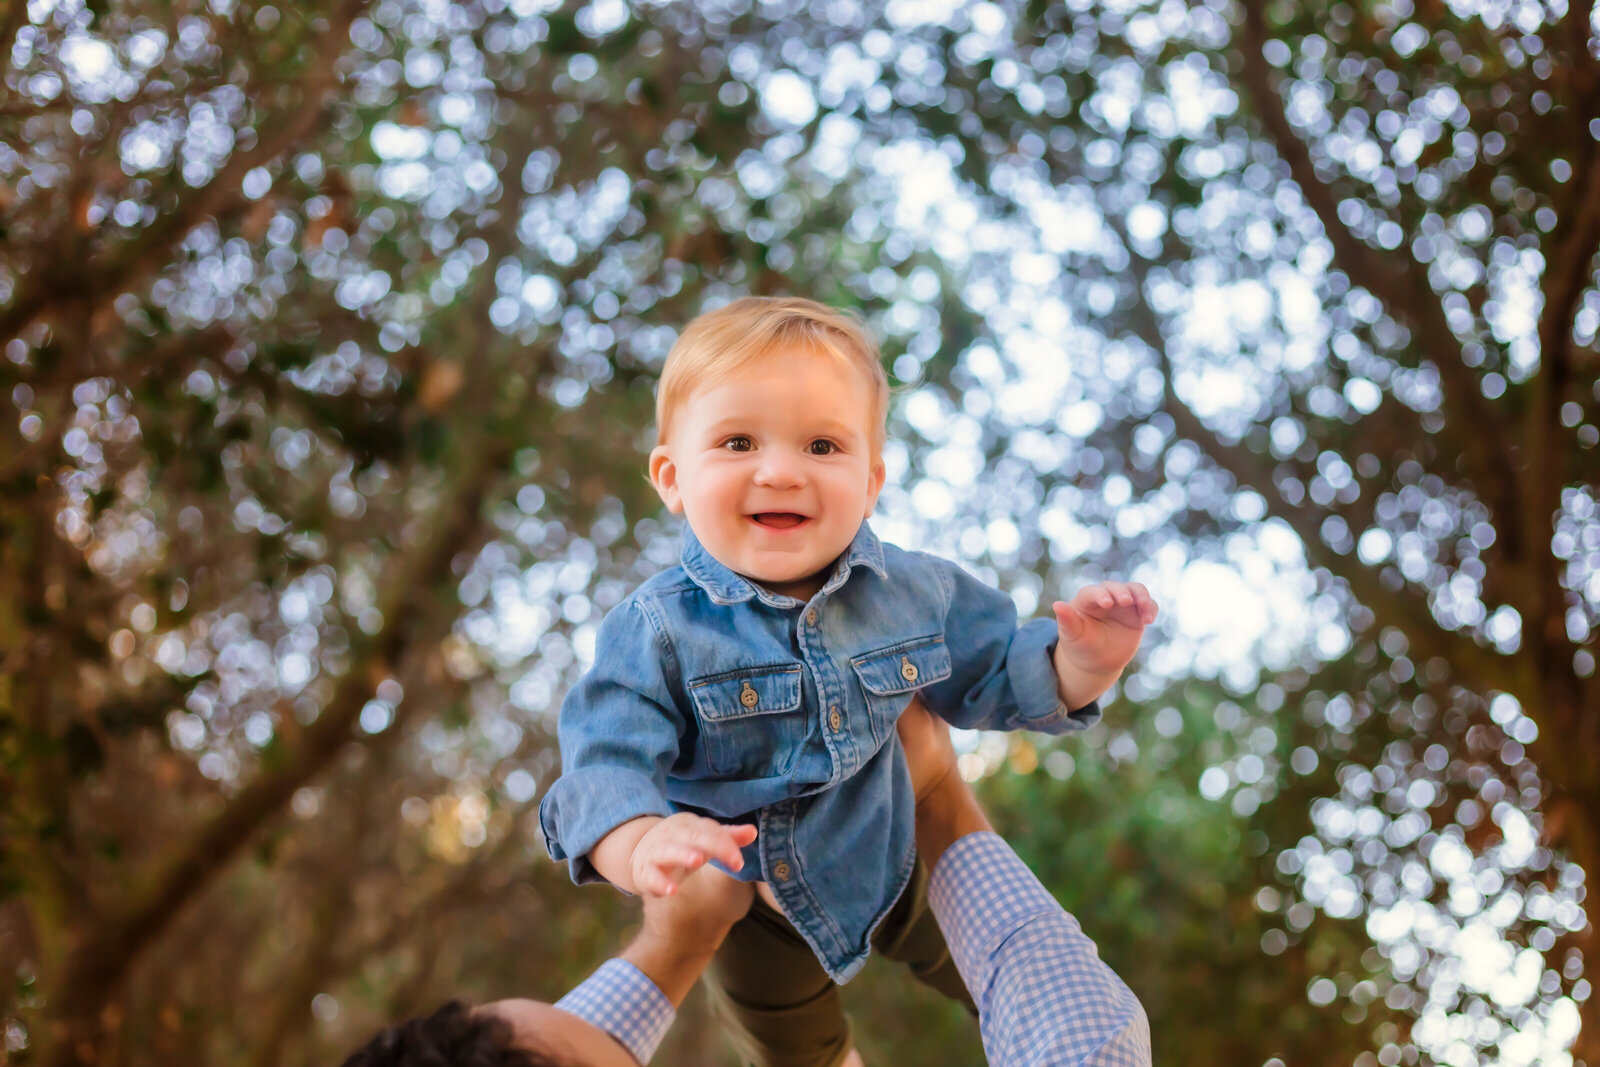 Family Photographer, parents arms raise their smiling baby boy into the air